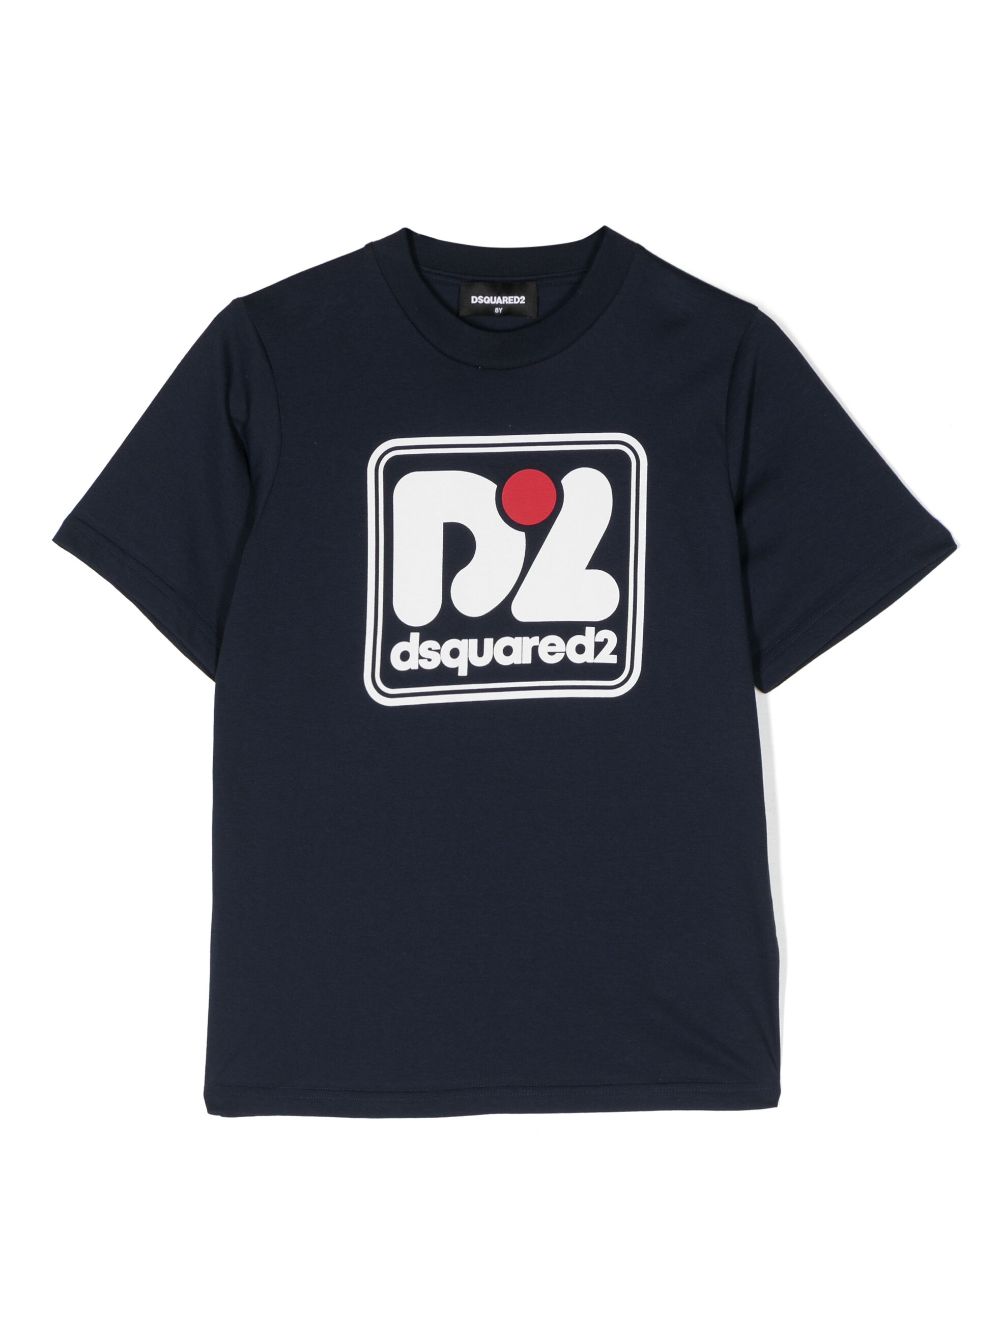 Blue t-shirt for boys with logo